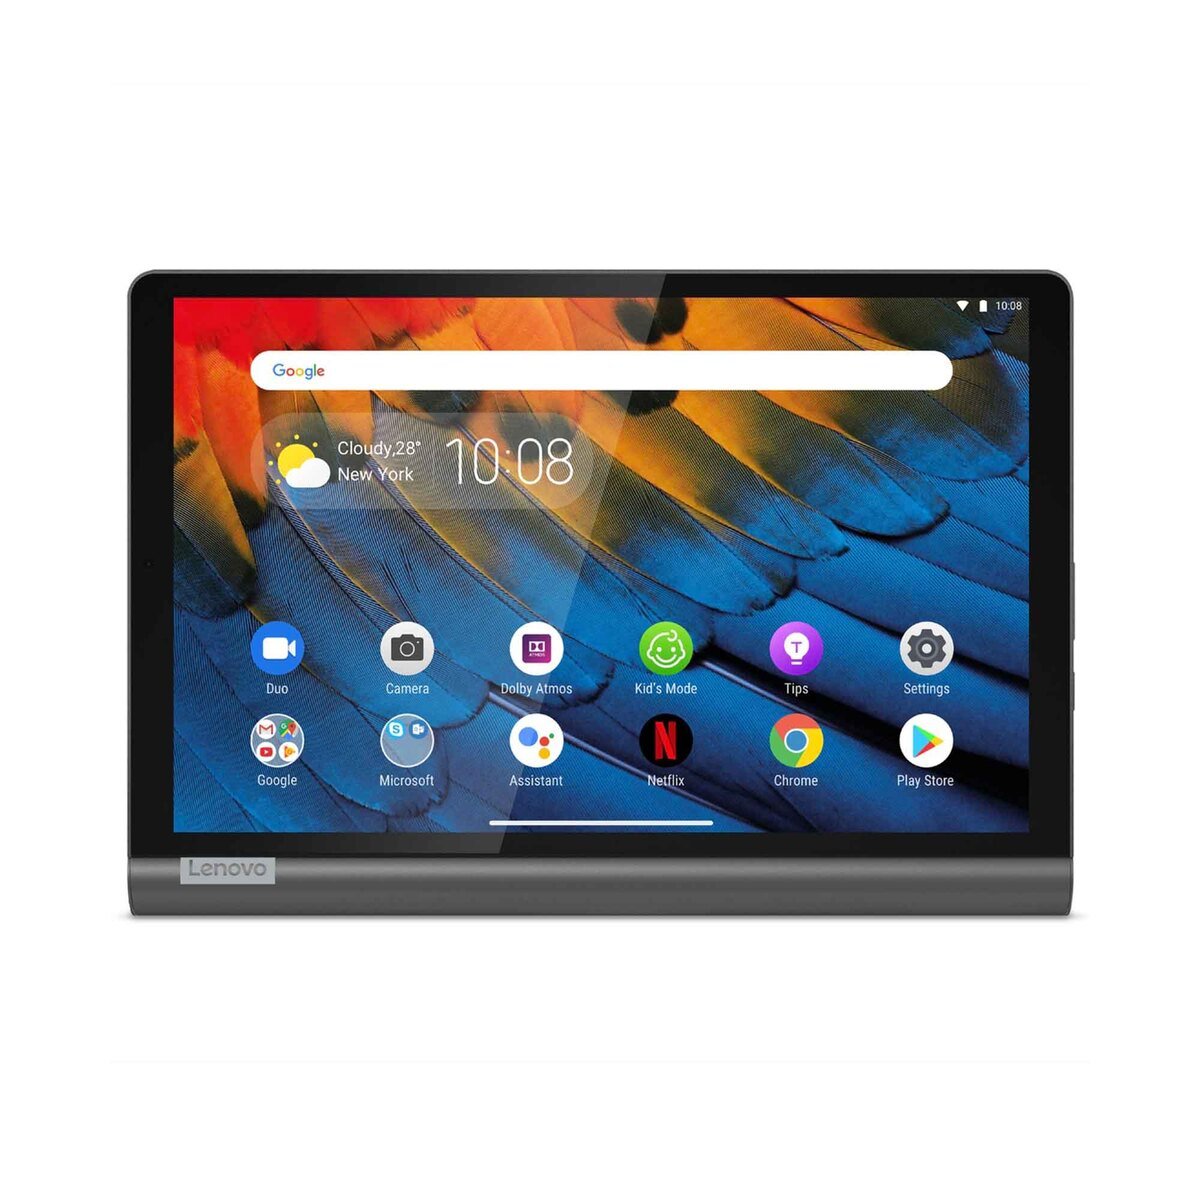 Lenovo Yoga Tablet YT-X705F, Octa-core, 3GB RAM, 32GB Memory, WiFi, 10.1 inches Display, Android 9 (Pie), Gray